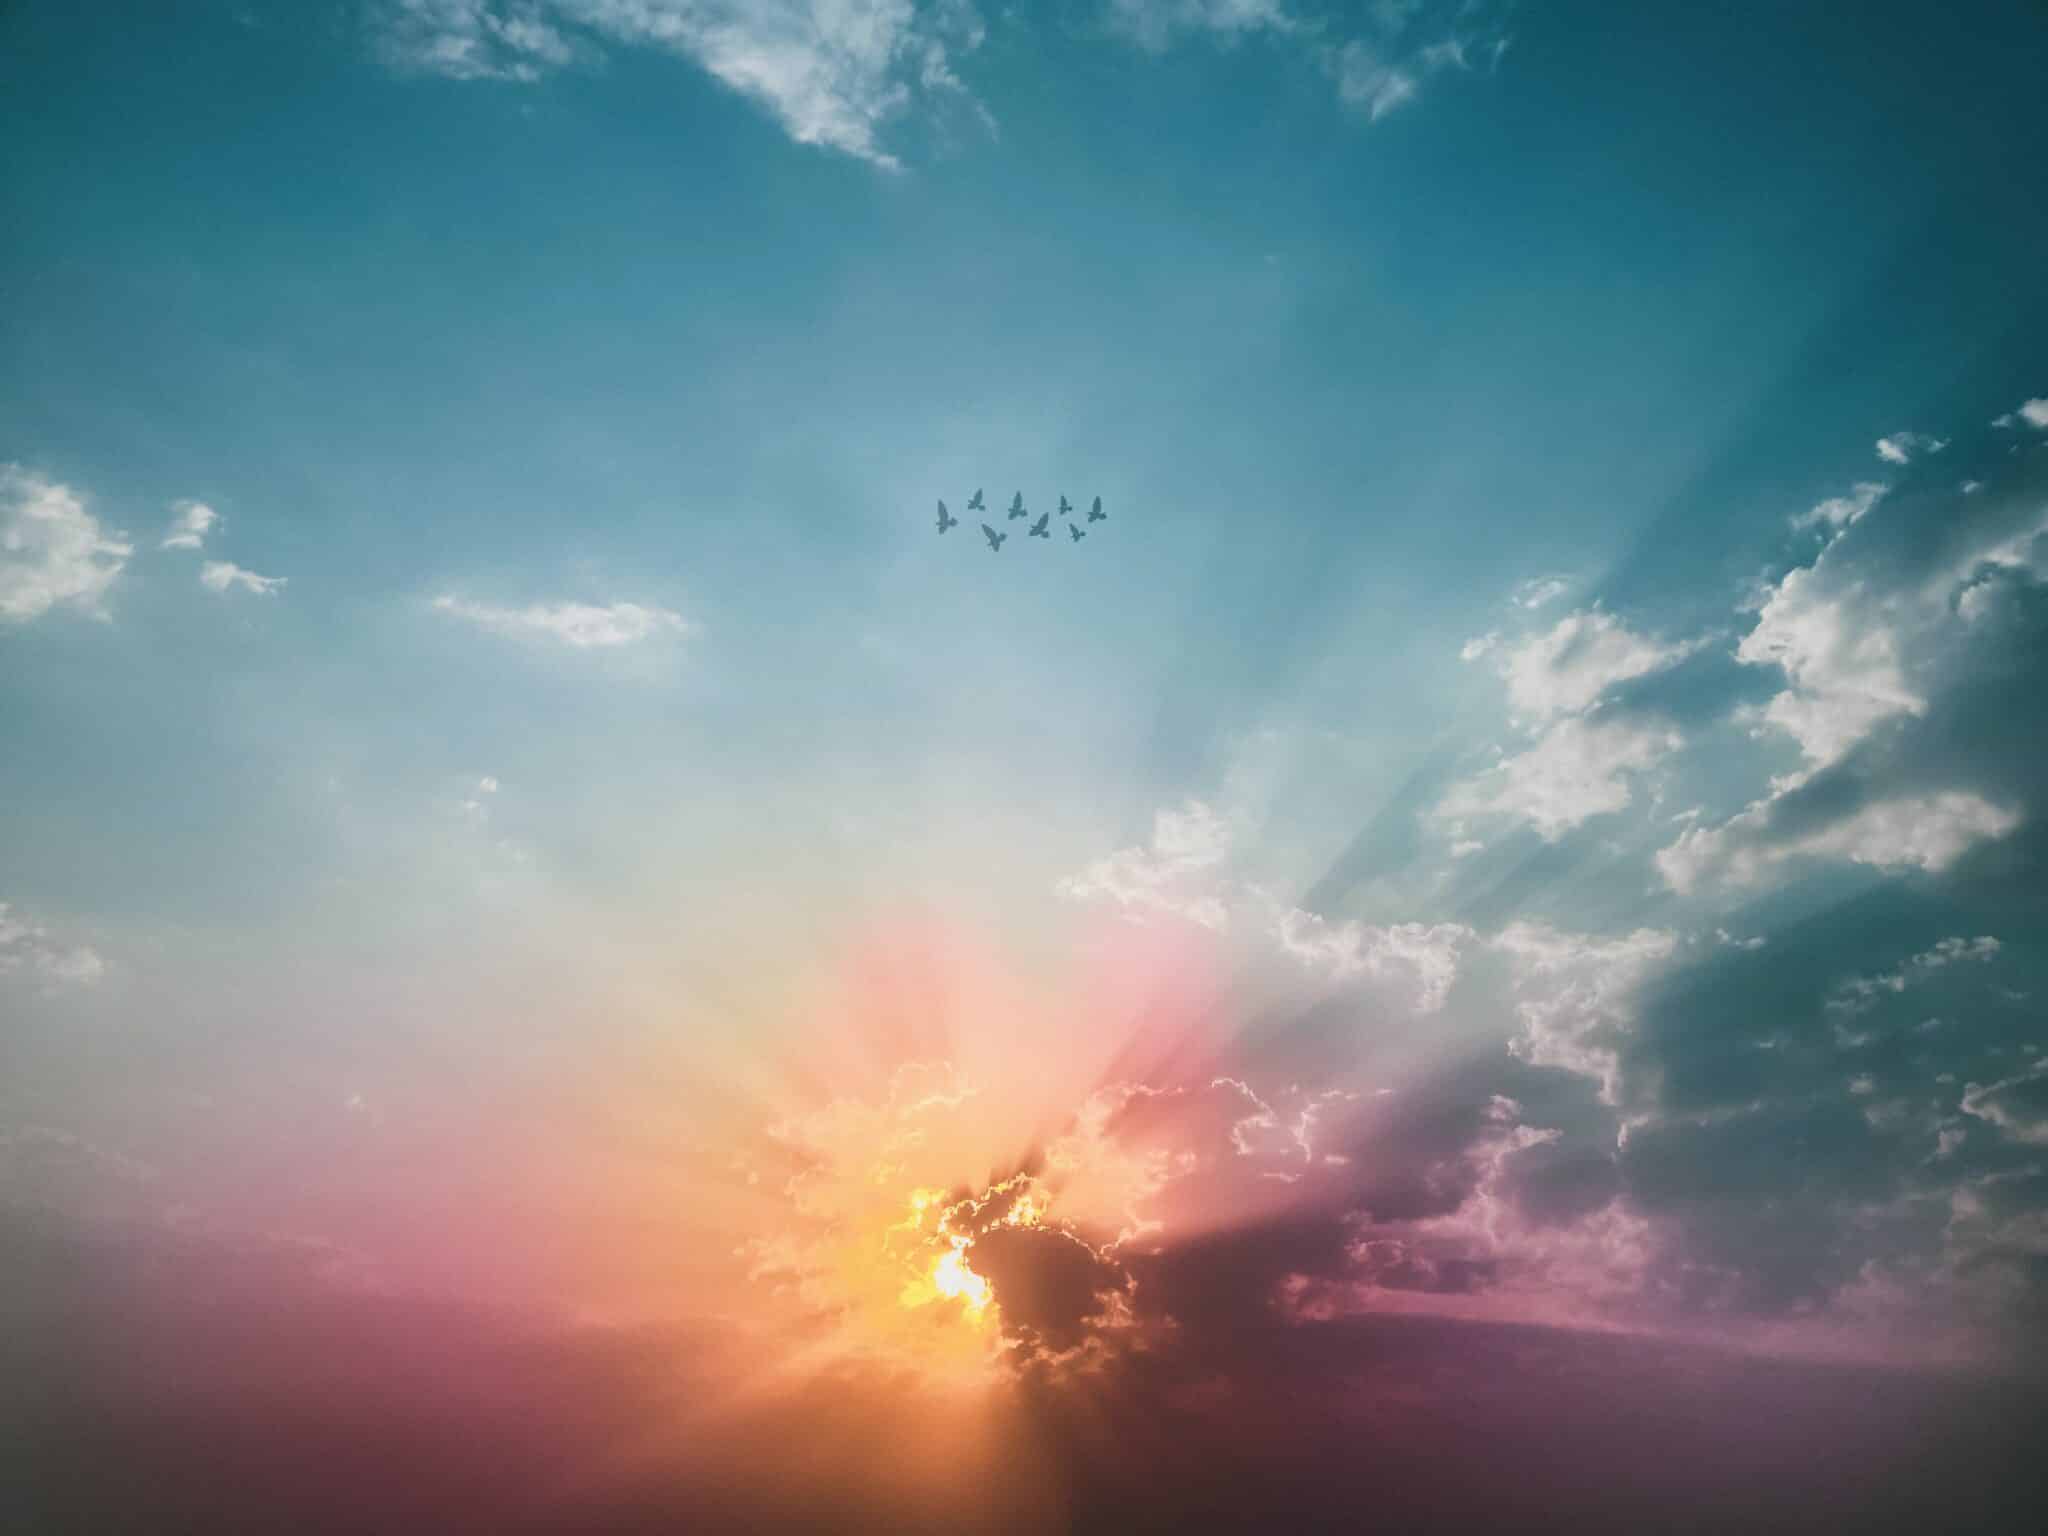 Sun peeking through the clouds and birds in the sky